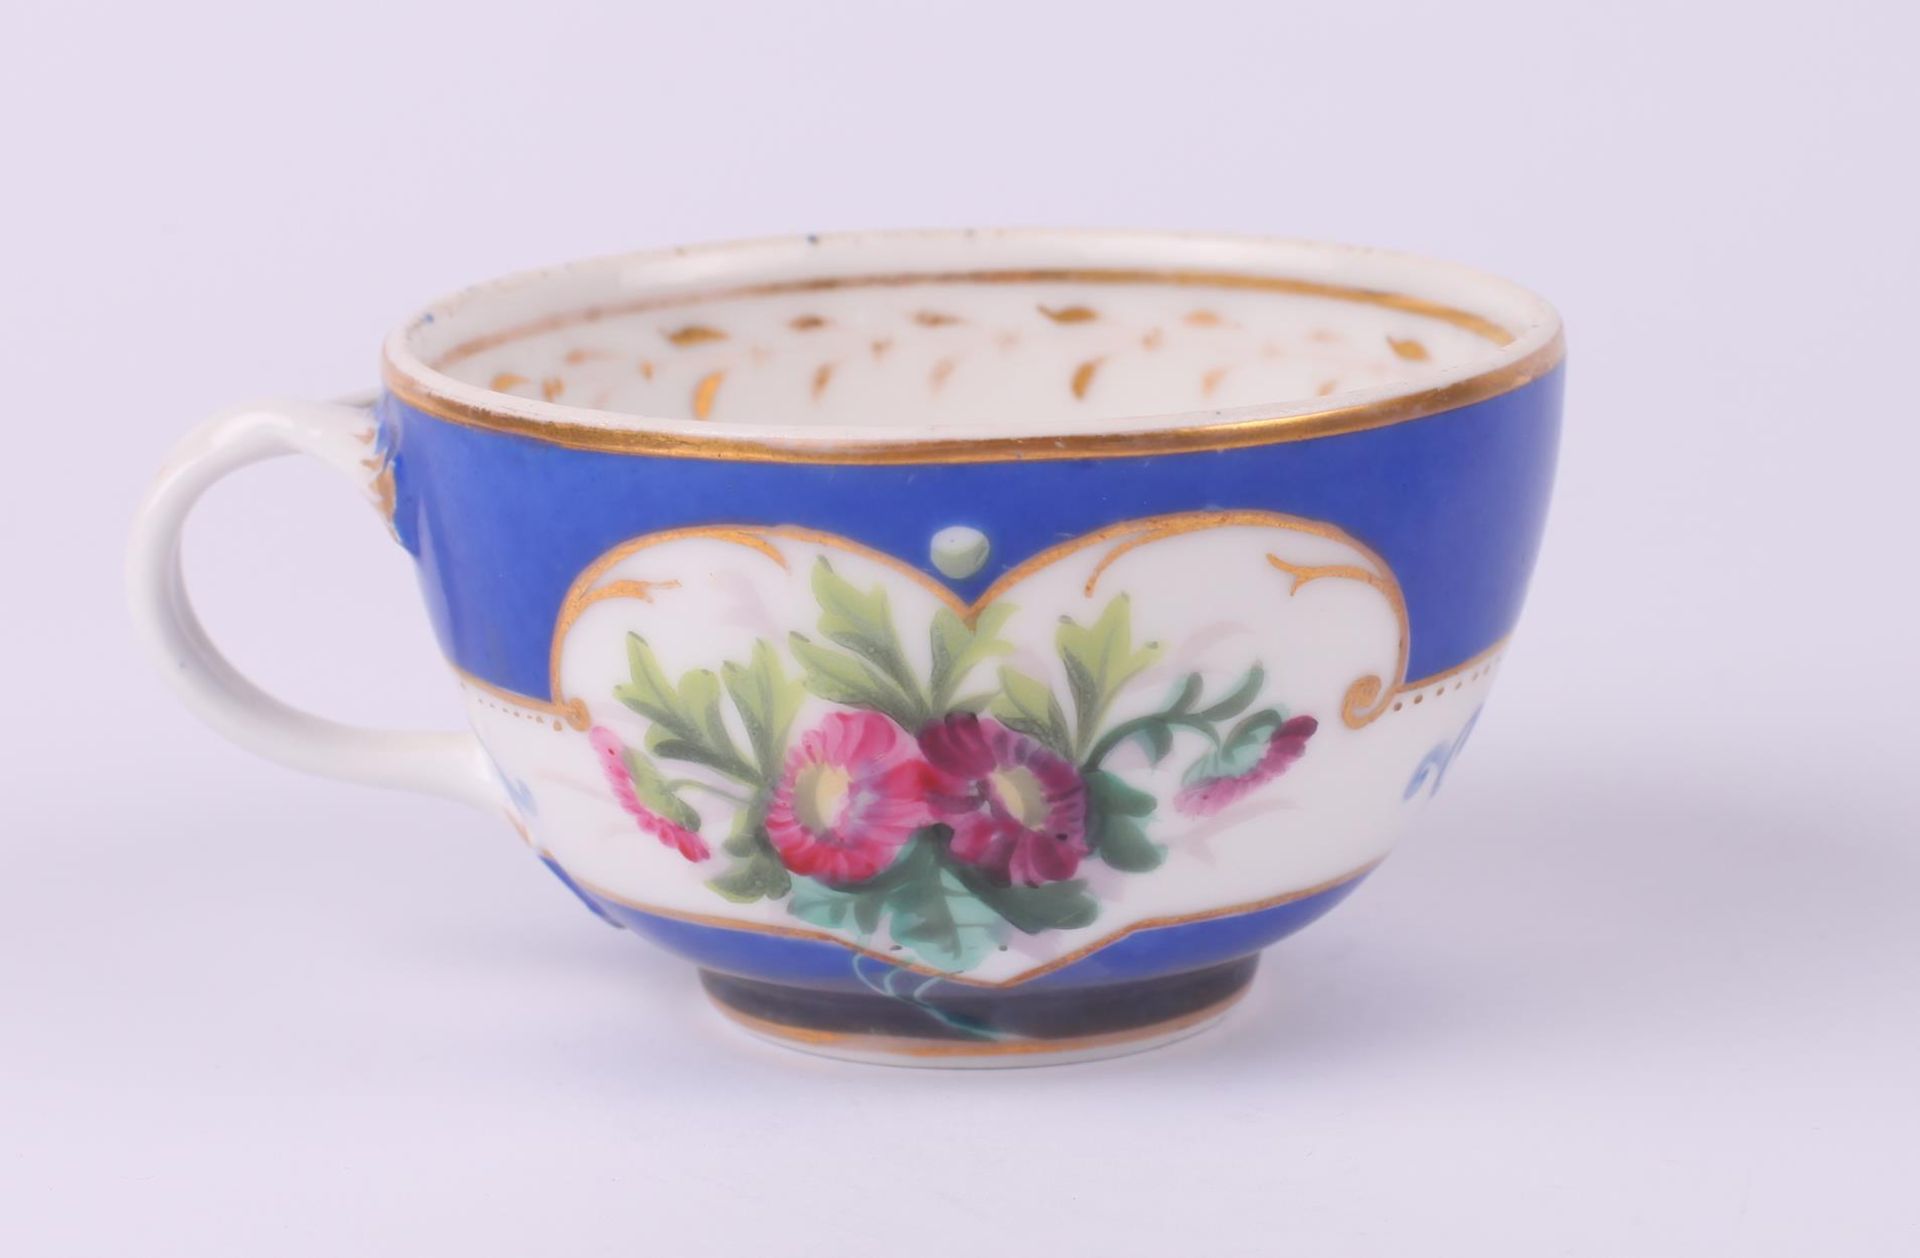 Tea cup and saucer set with floral painting. Russia. 1890s. Porcelain, painting, gilding. Cup: 5x8 - Image 2 of 13